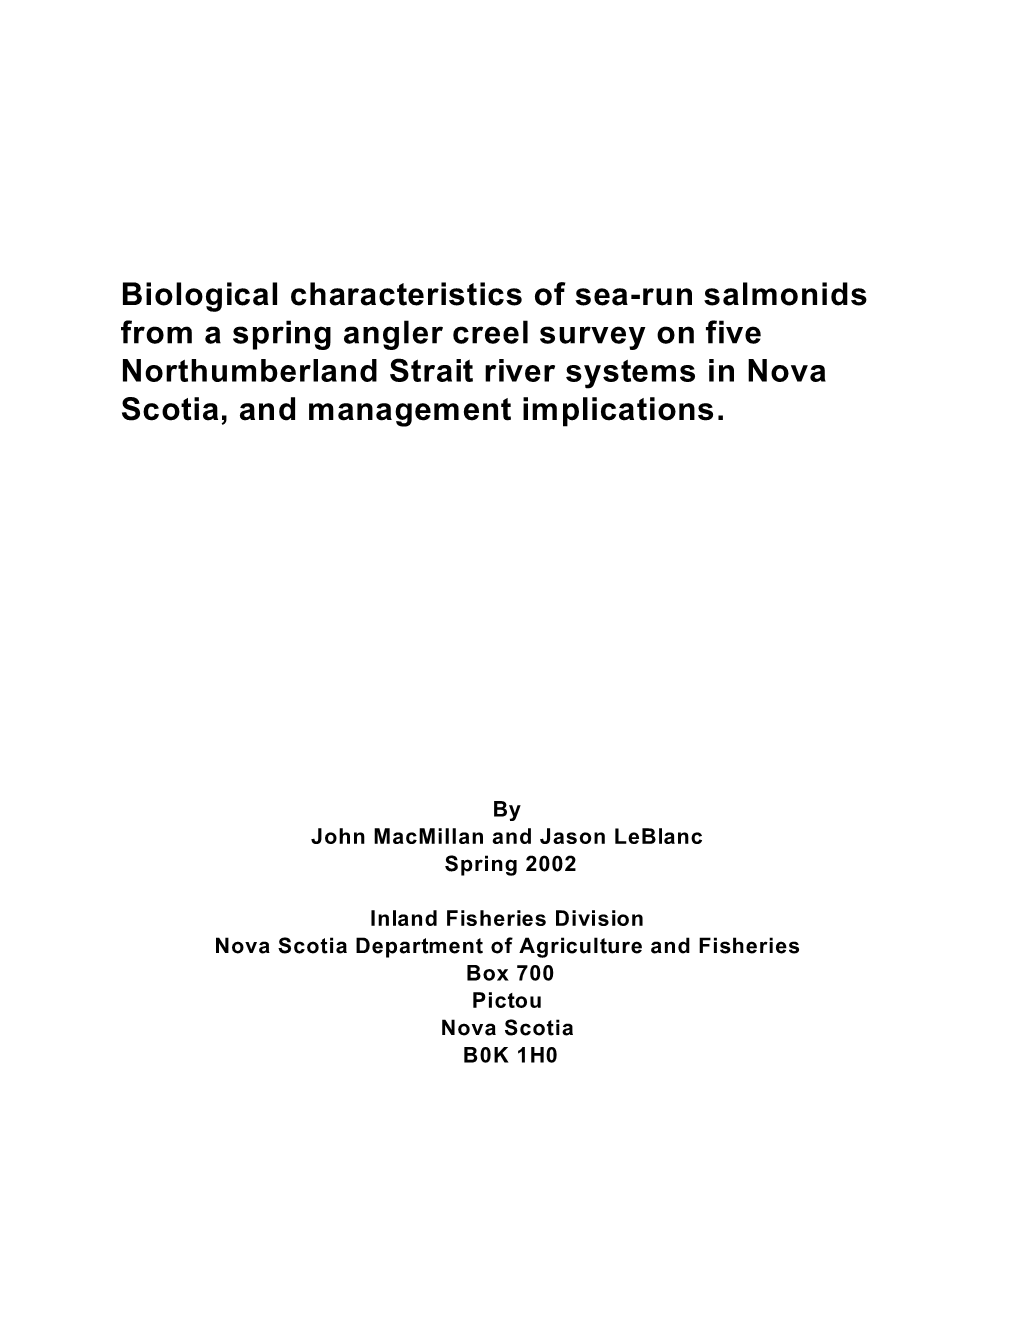 Biological Characteristics of Sea-Run Salmonids from a Spring Angler Creel Survey on Five Northumberland Strait River Systems In